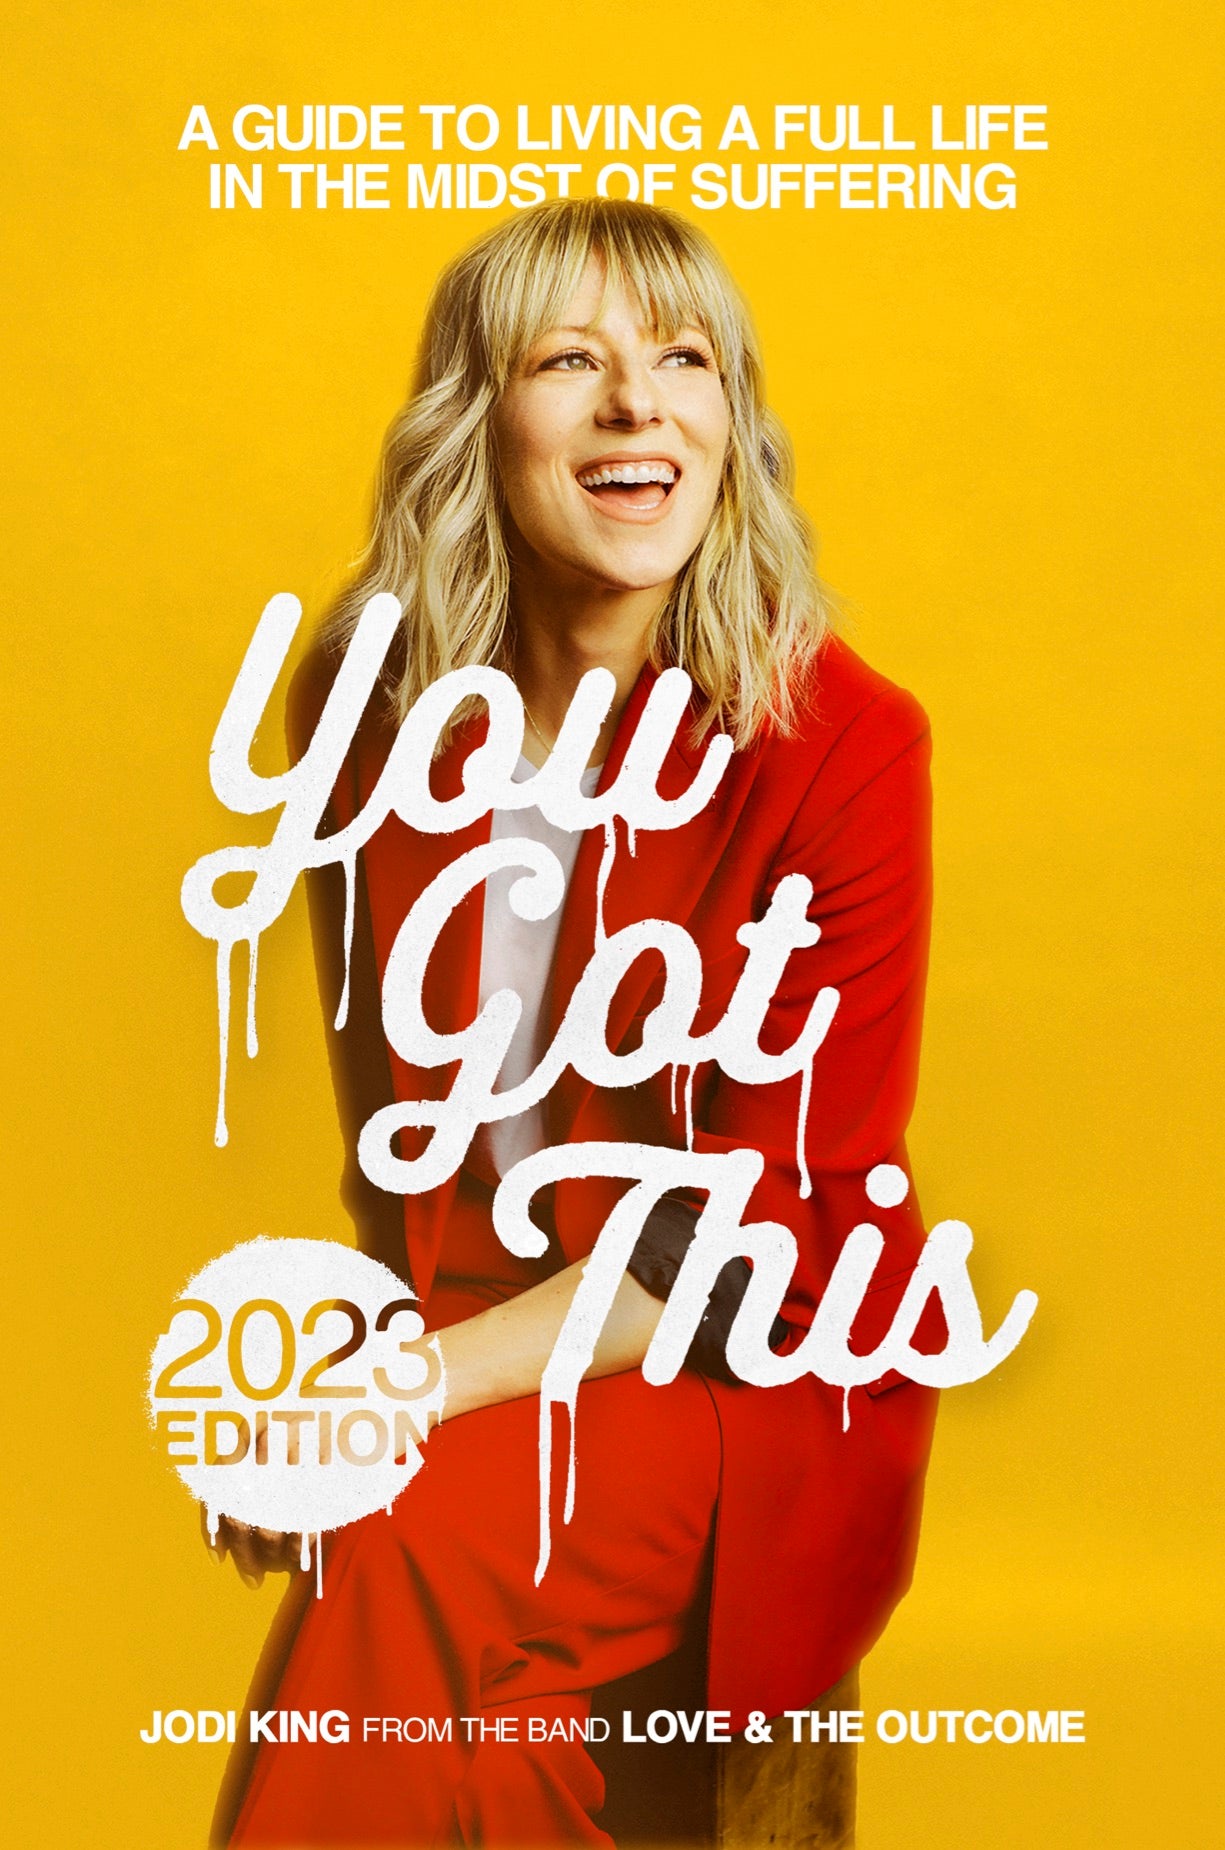 "YOU GOT THIS 2023 Edition" - Book